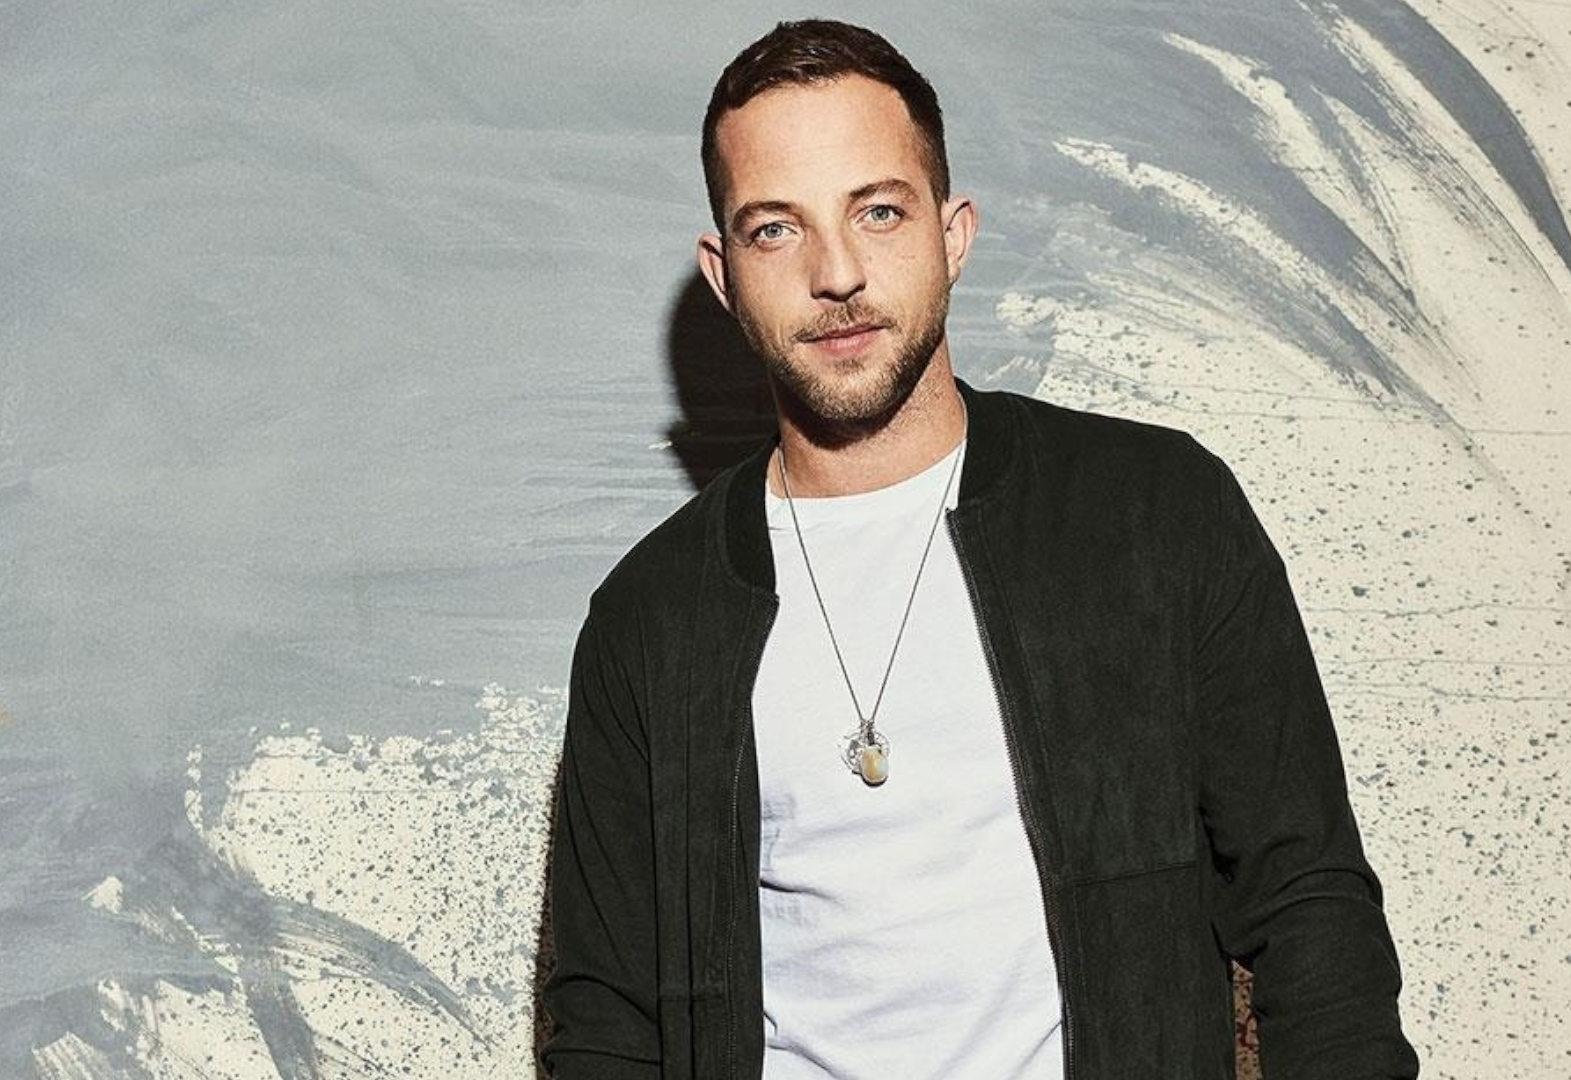 James Morrison Age, Height, Nationality, Songs - ABTC